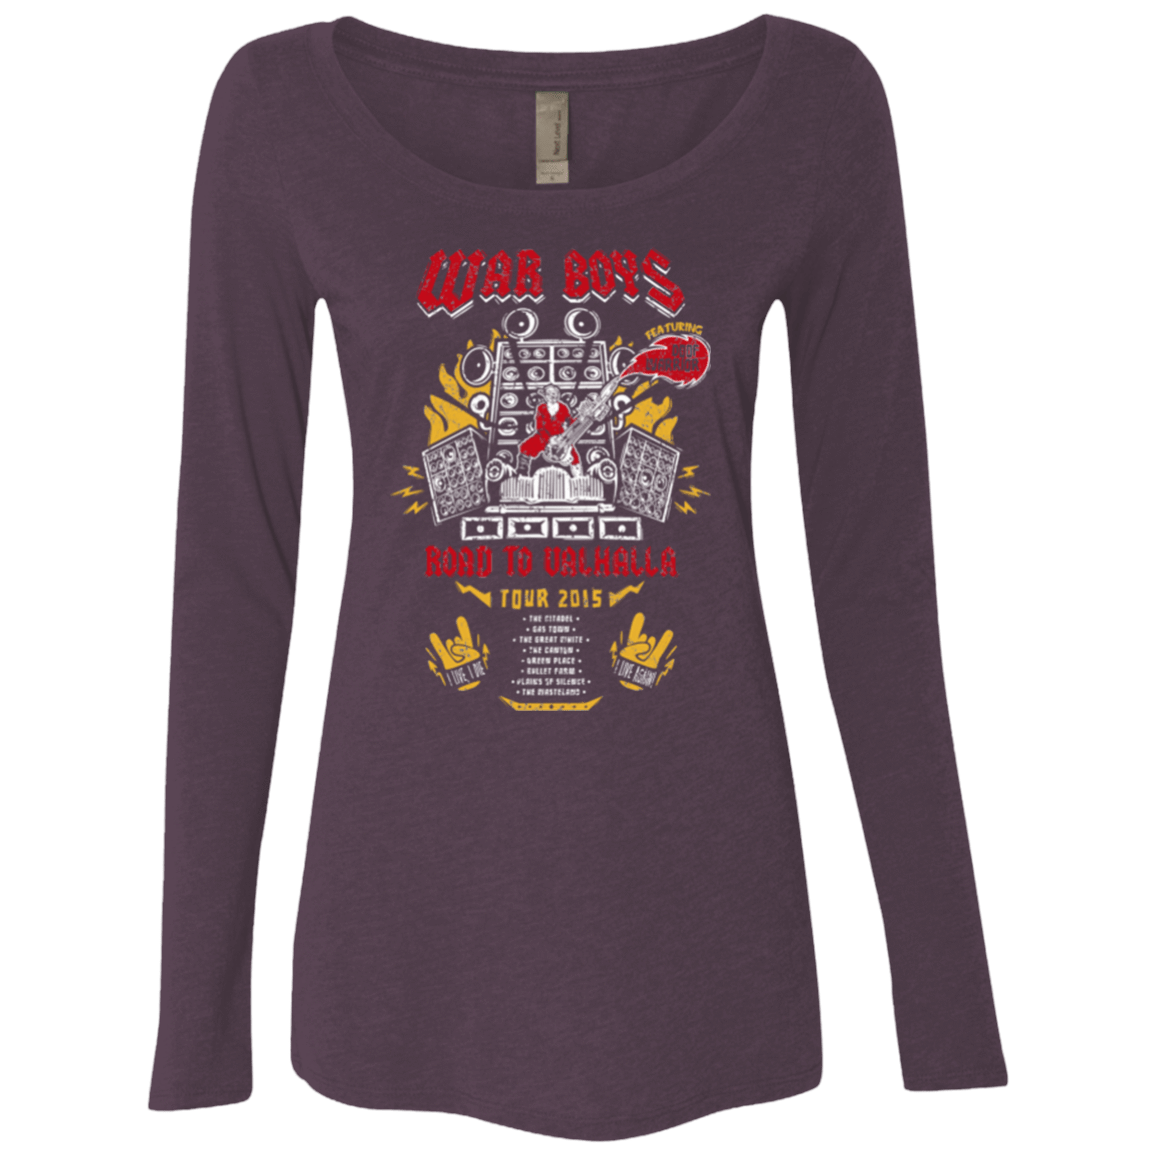 T-Shirts Vintage Purple / Small Road to Valhalla Tour Women's Triblend Long Sleeve Shirt